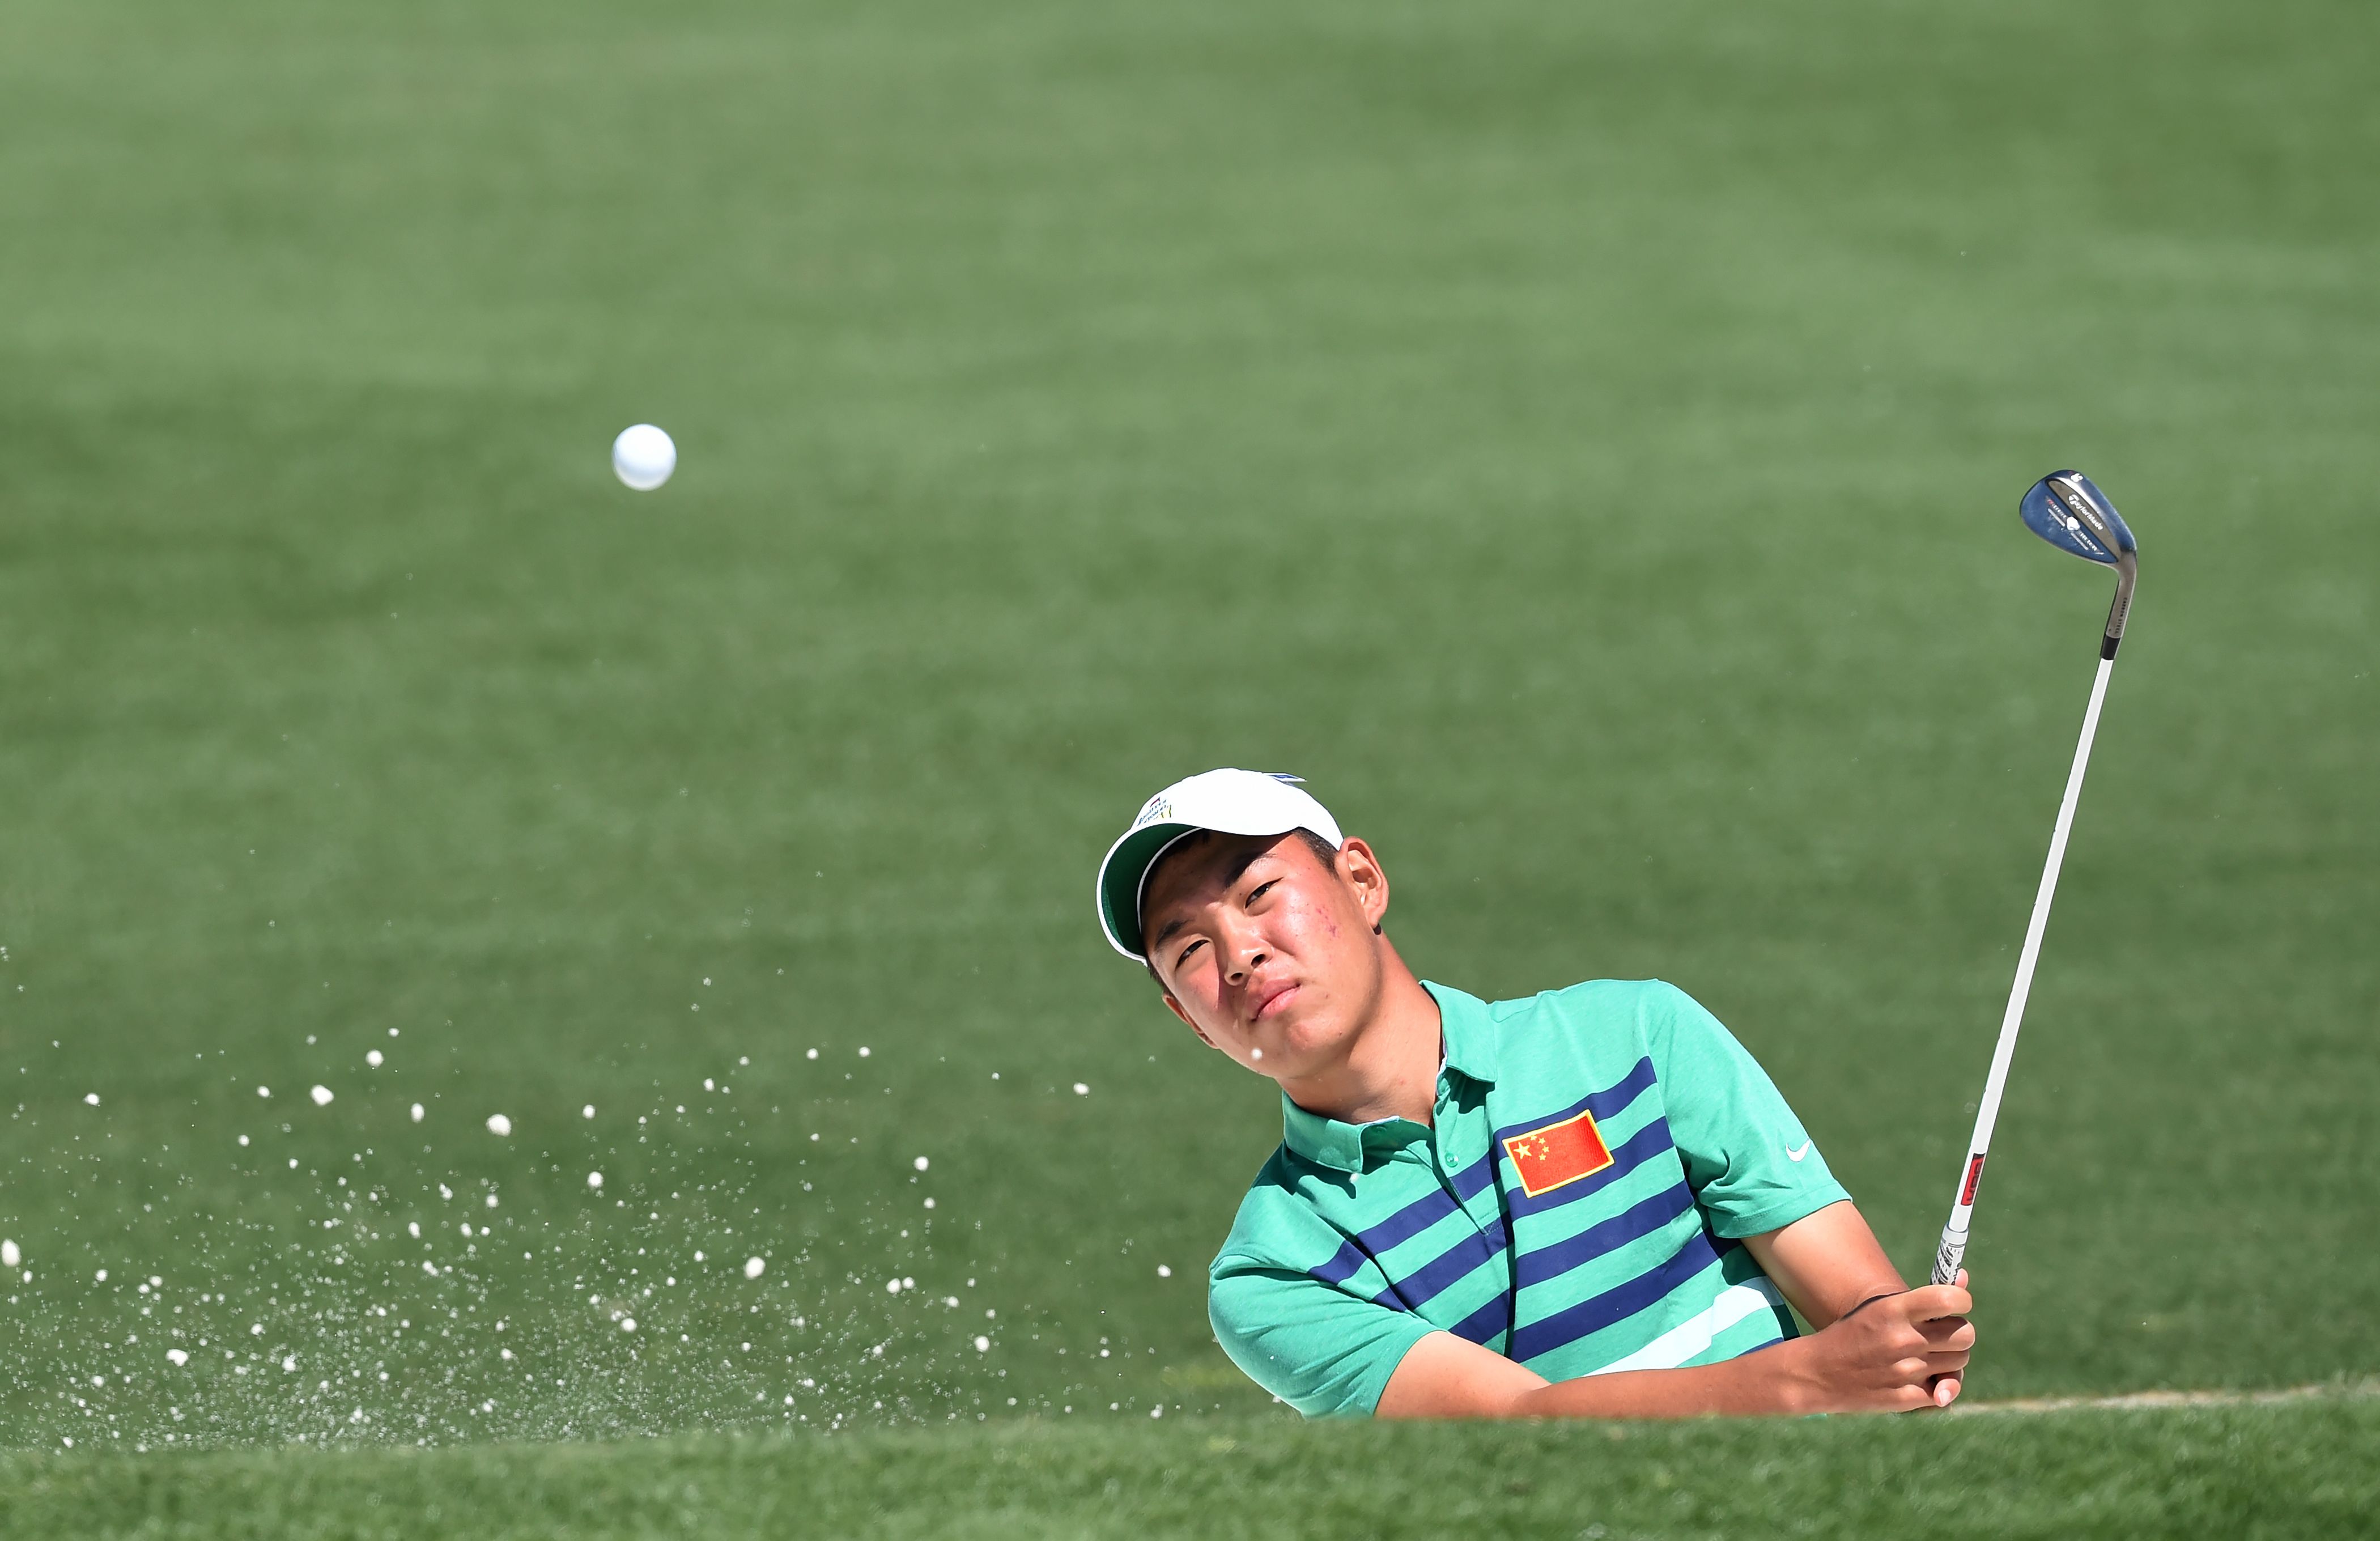 China's Jin Cheng hits out of a bunker during a practice round prior to the start of the 80th Masters Golf Tournament at the Augusta National Golf Club in Augusta, Ga., on April 5, 2016 (Don Emmert—AFP/Getty Images)